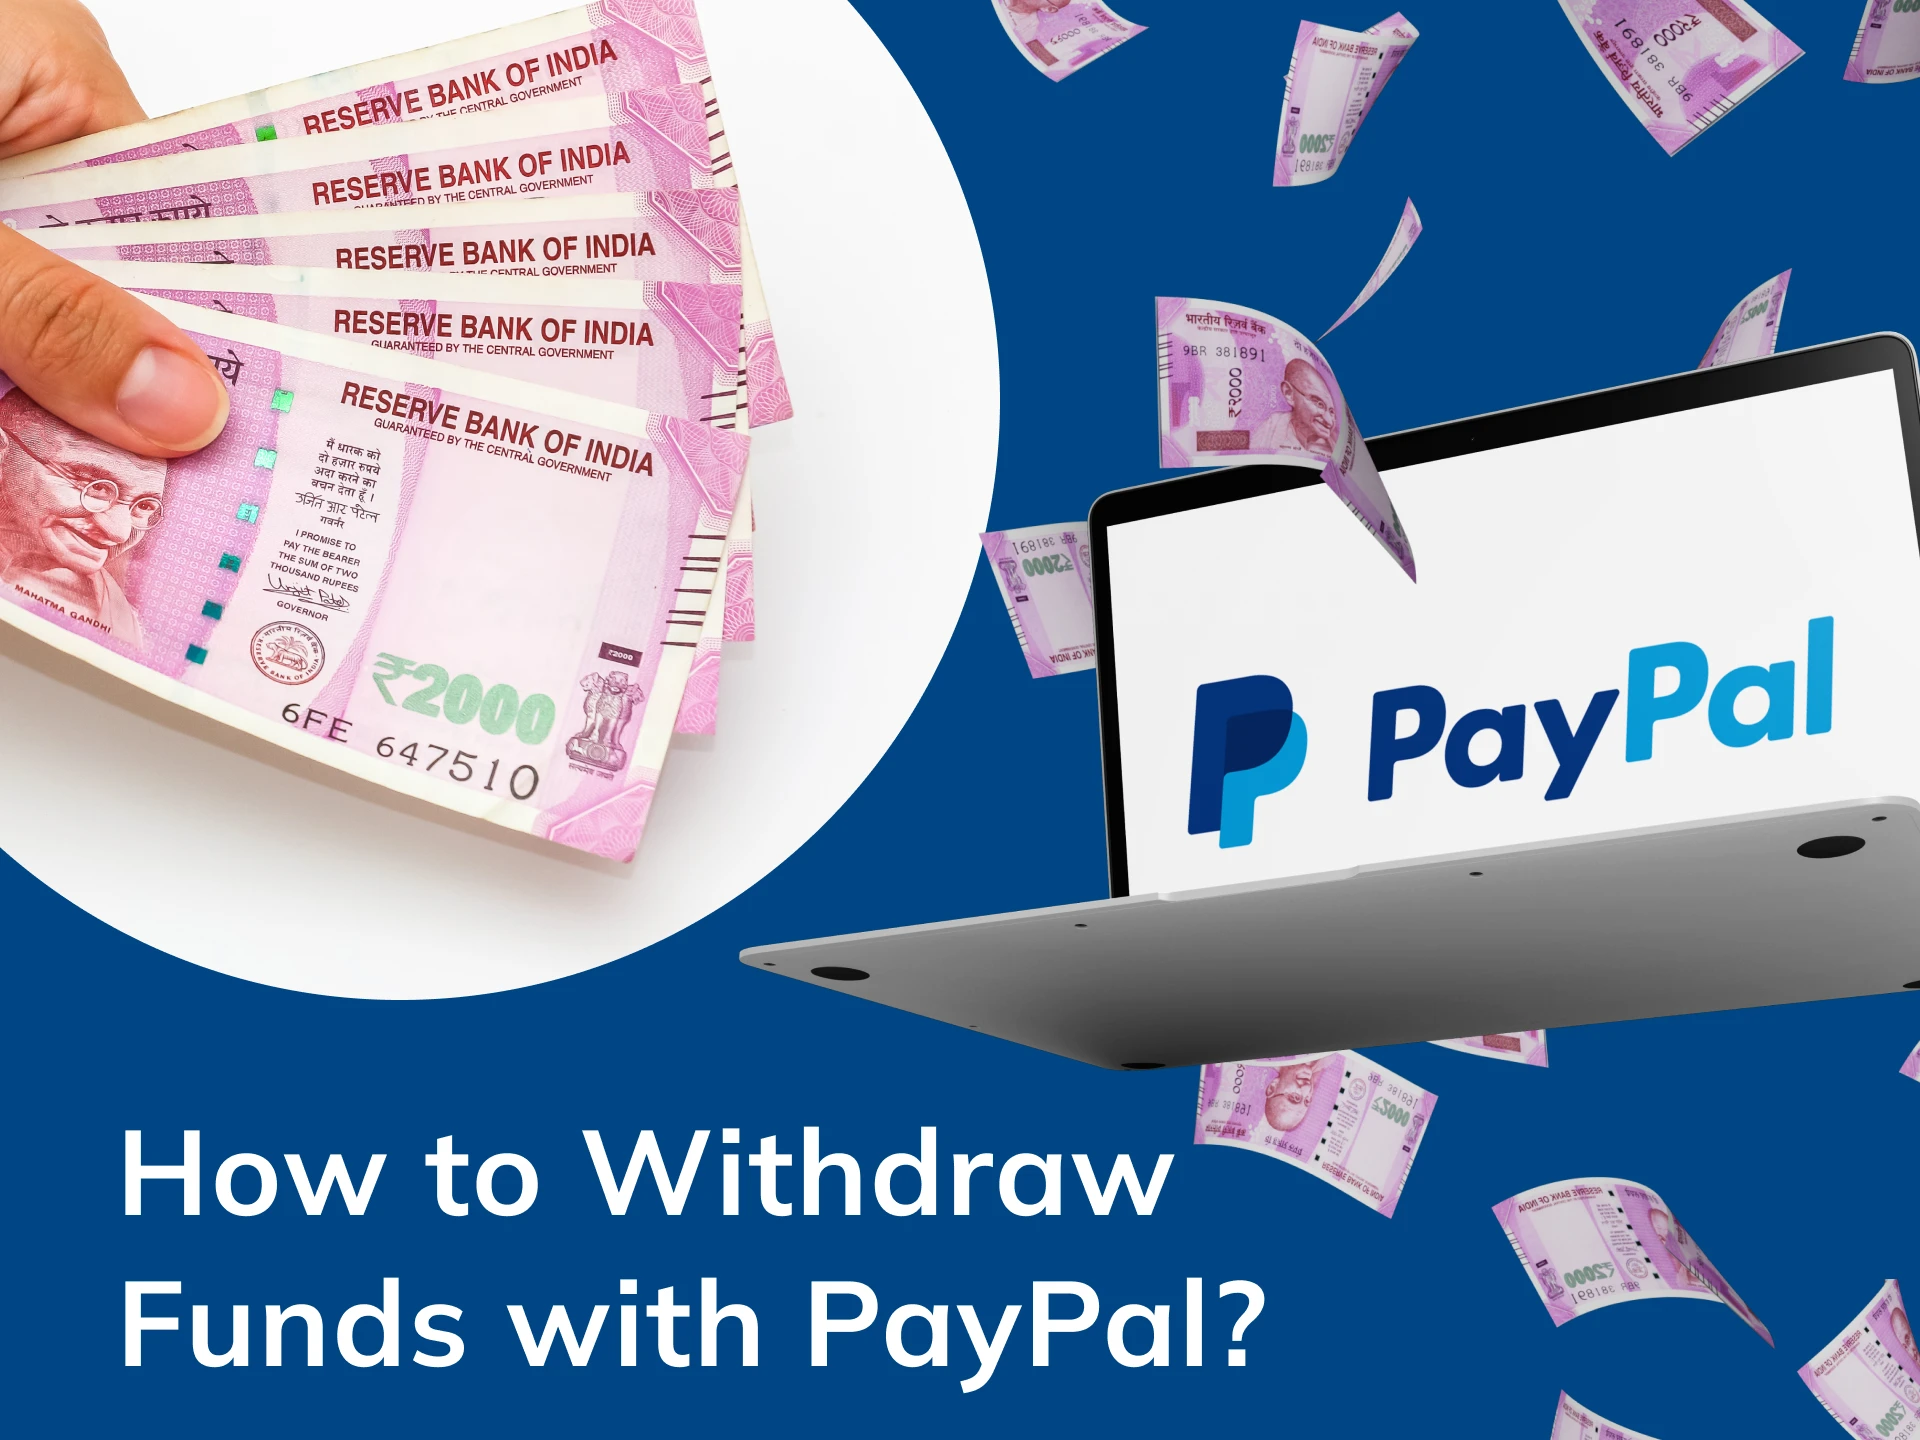 Withdraw your funds quickly and easily with PayPal.